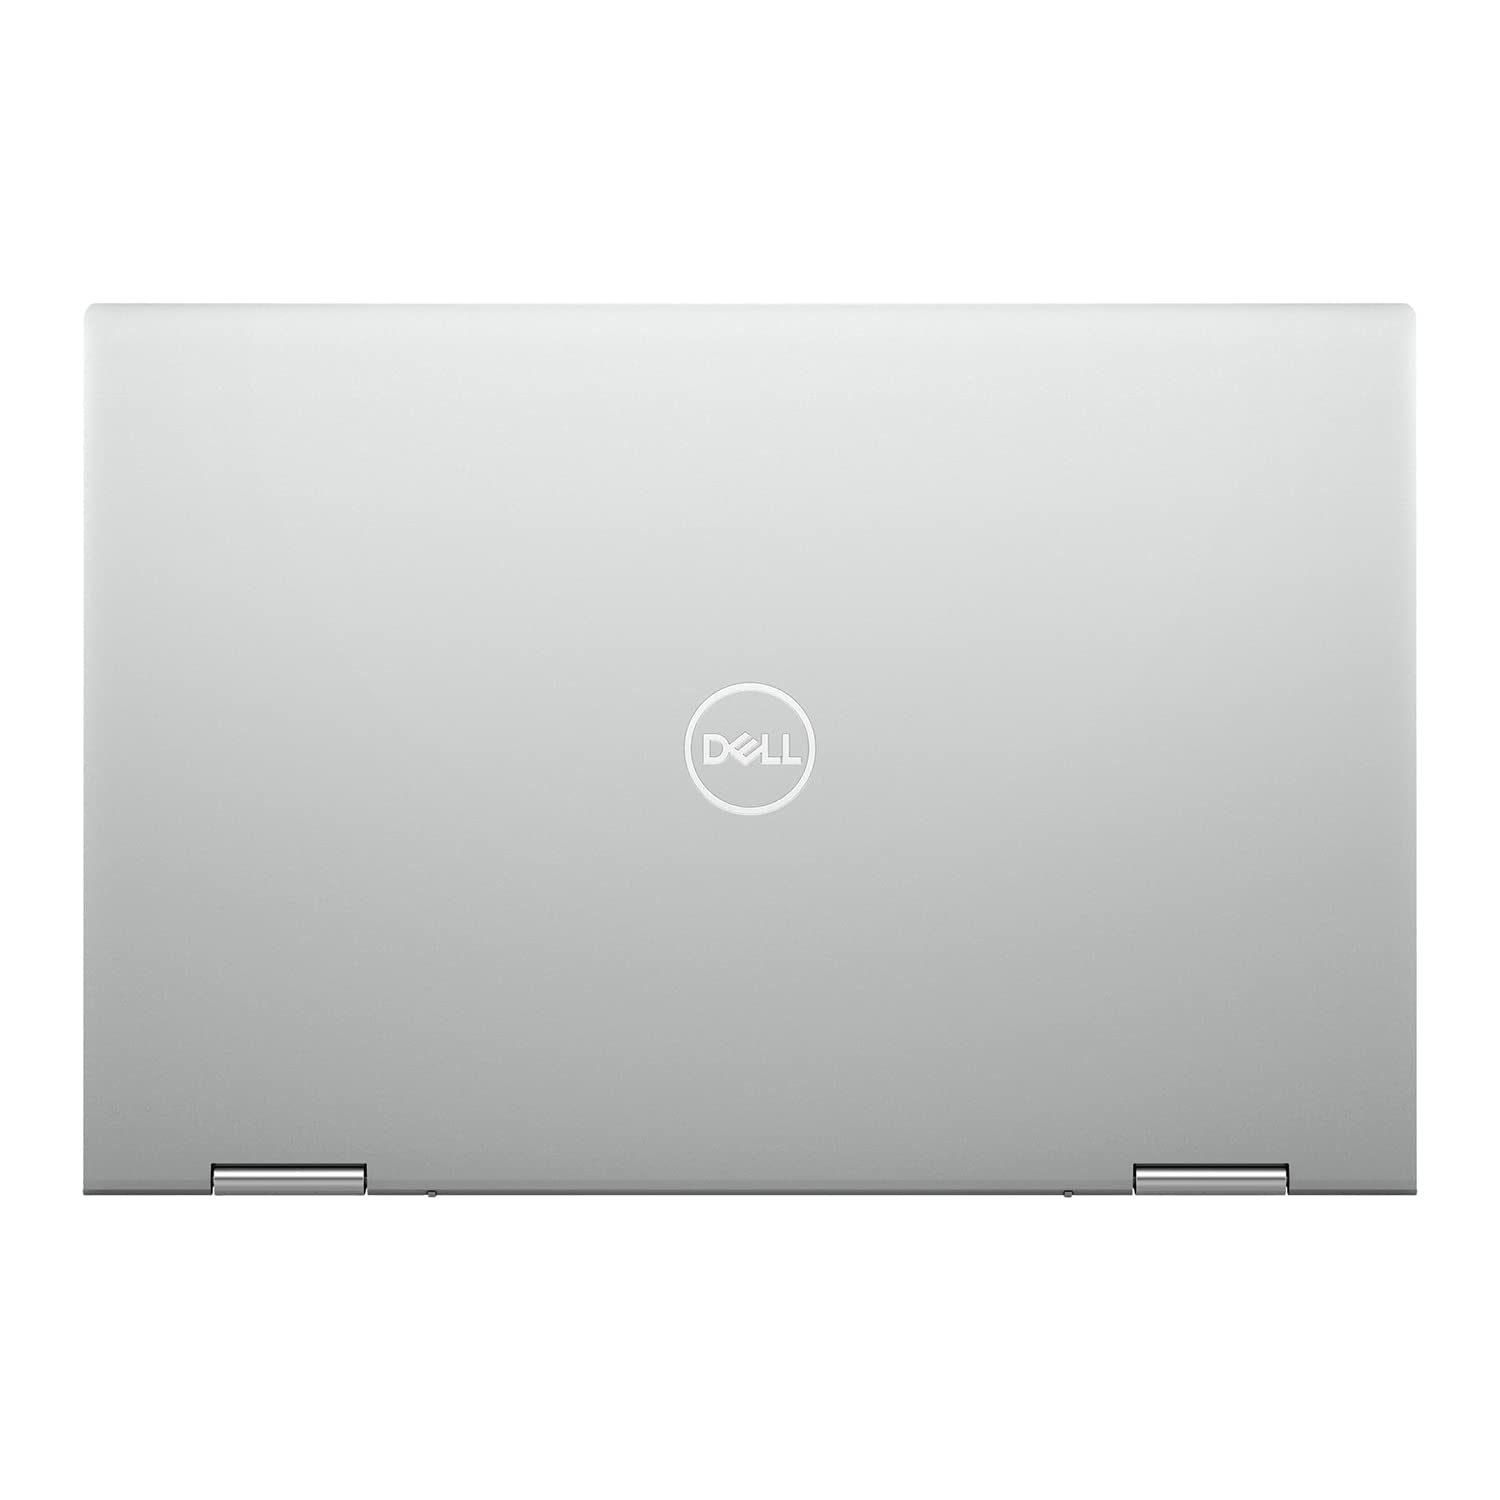 Dell 2022 Newest Inspiron 7506 2-in-1 Laptop, 15.6